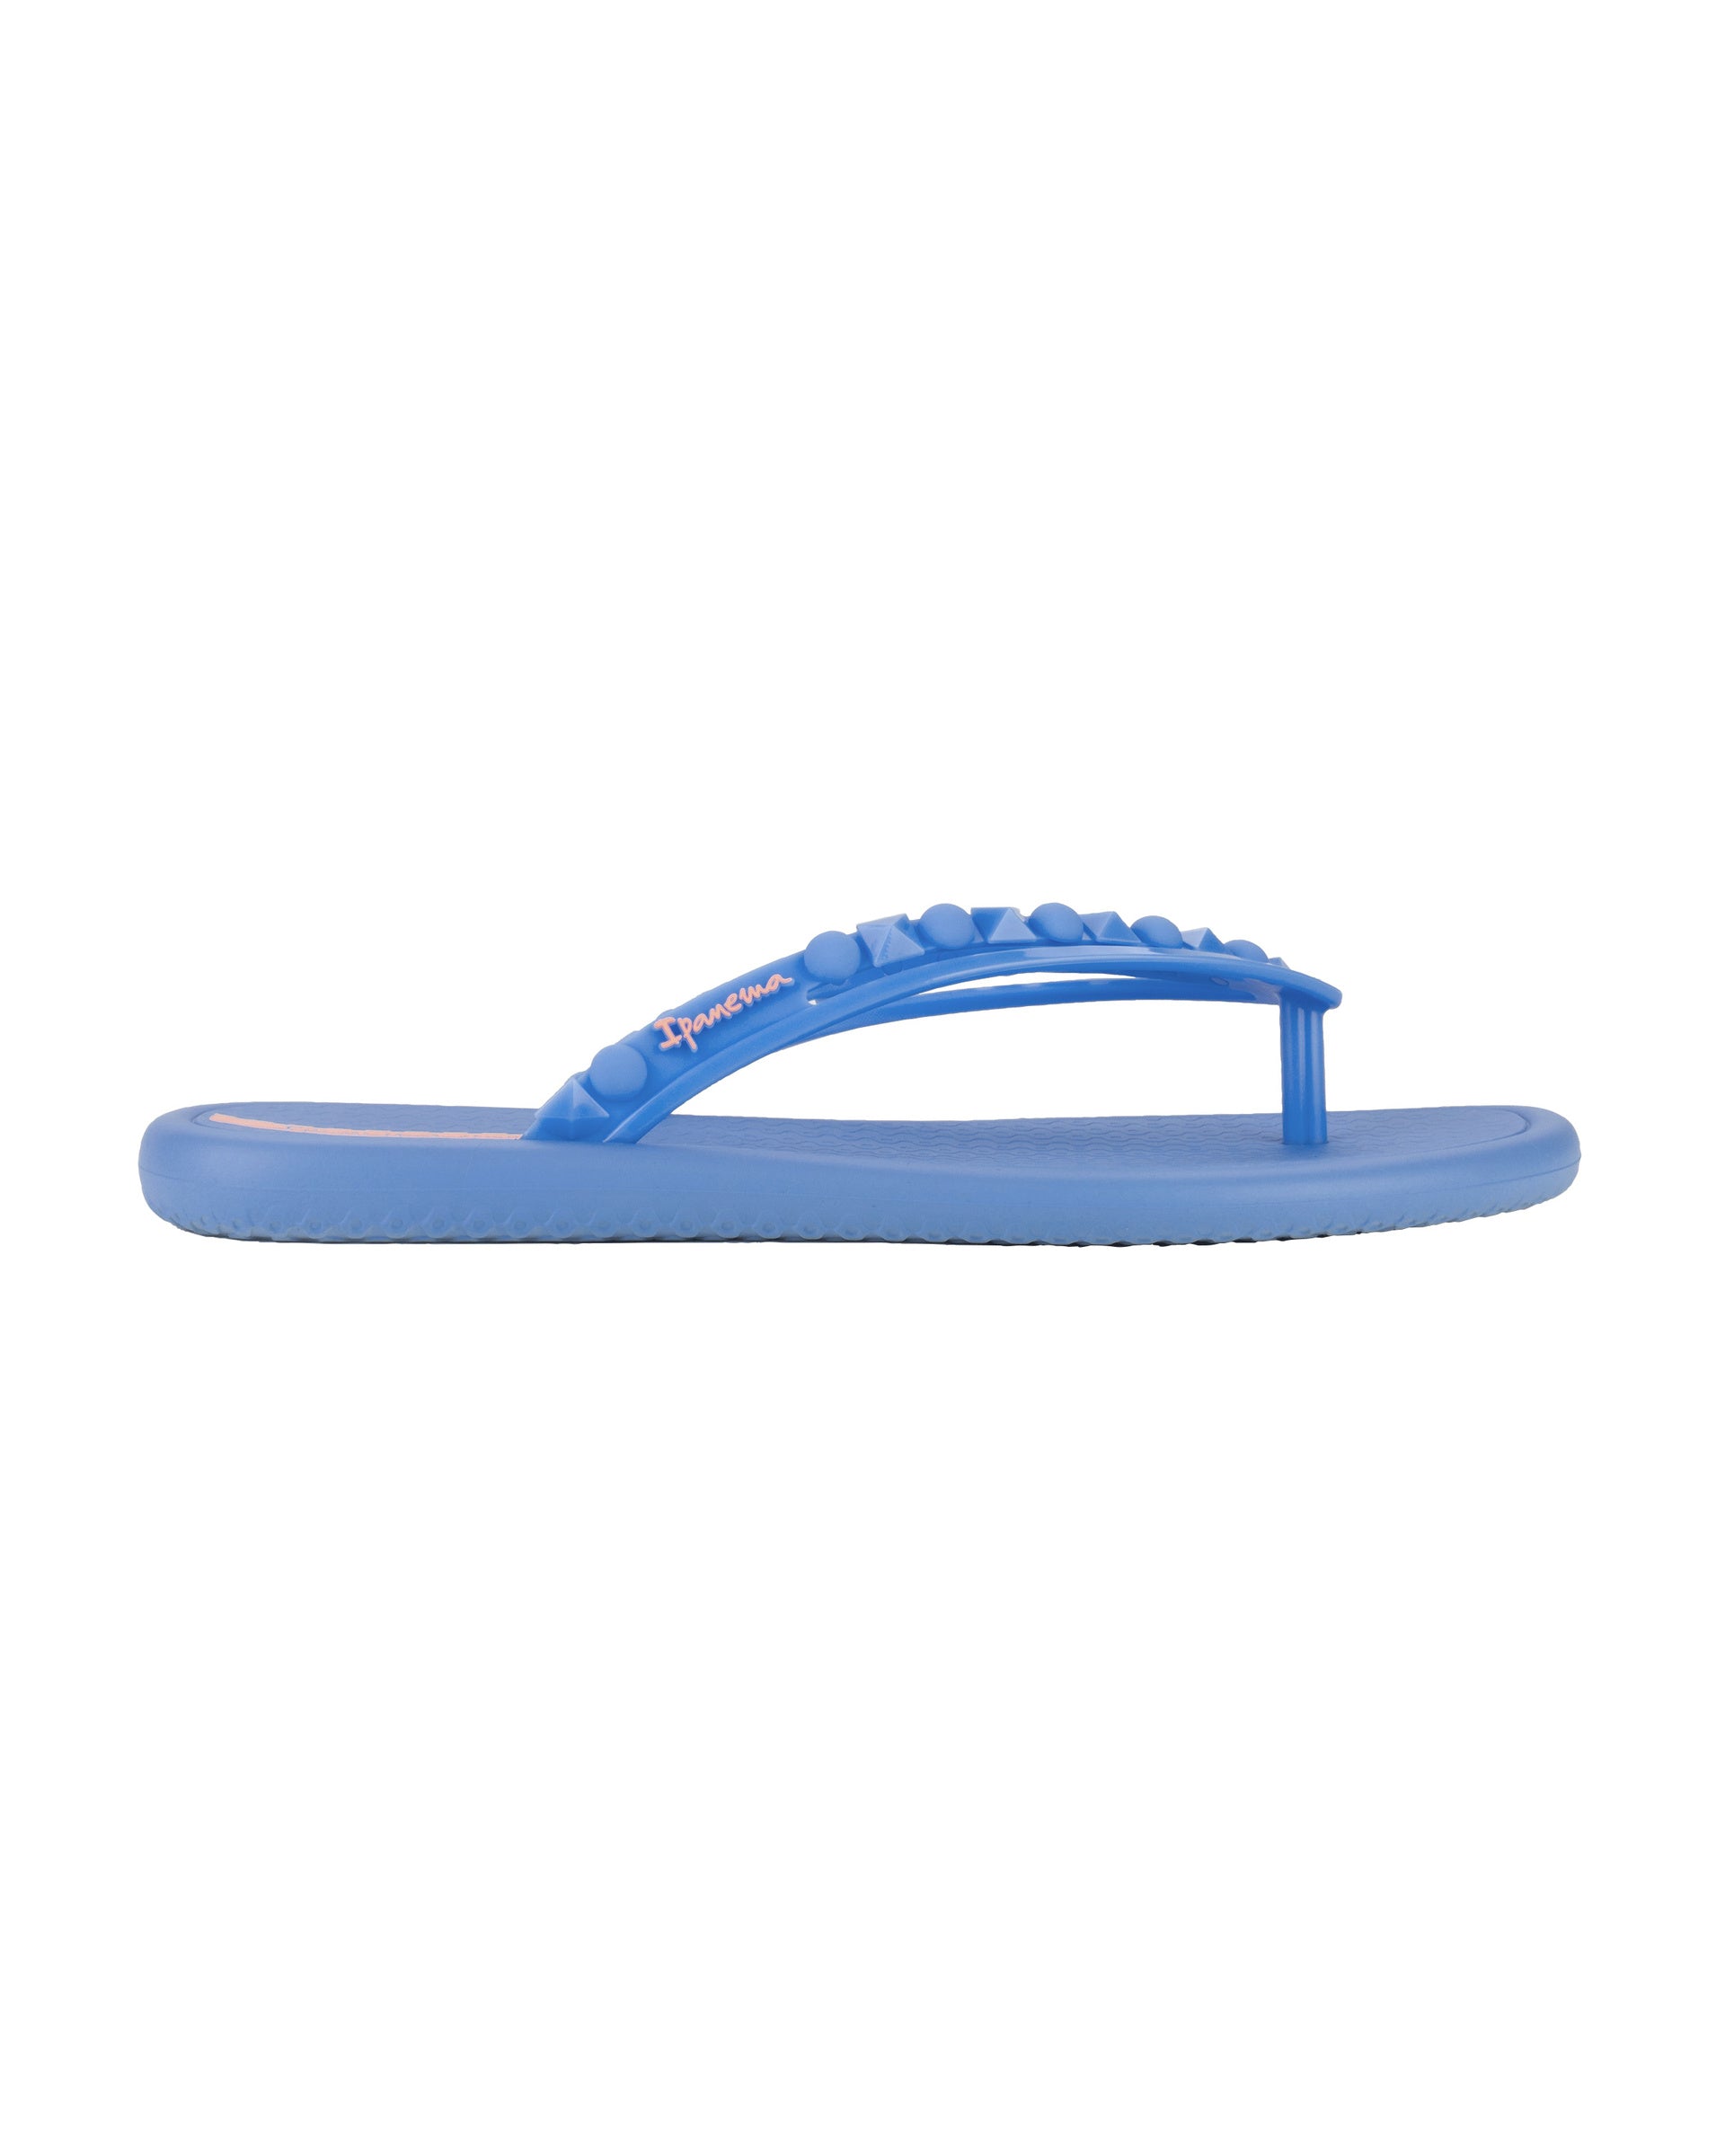 Side view of a blue Ipanema Meu Sol women's flip flop with stud details on strap.